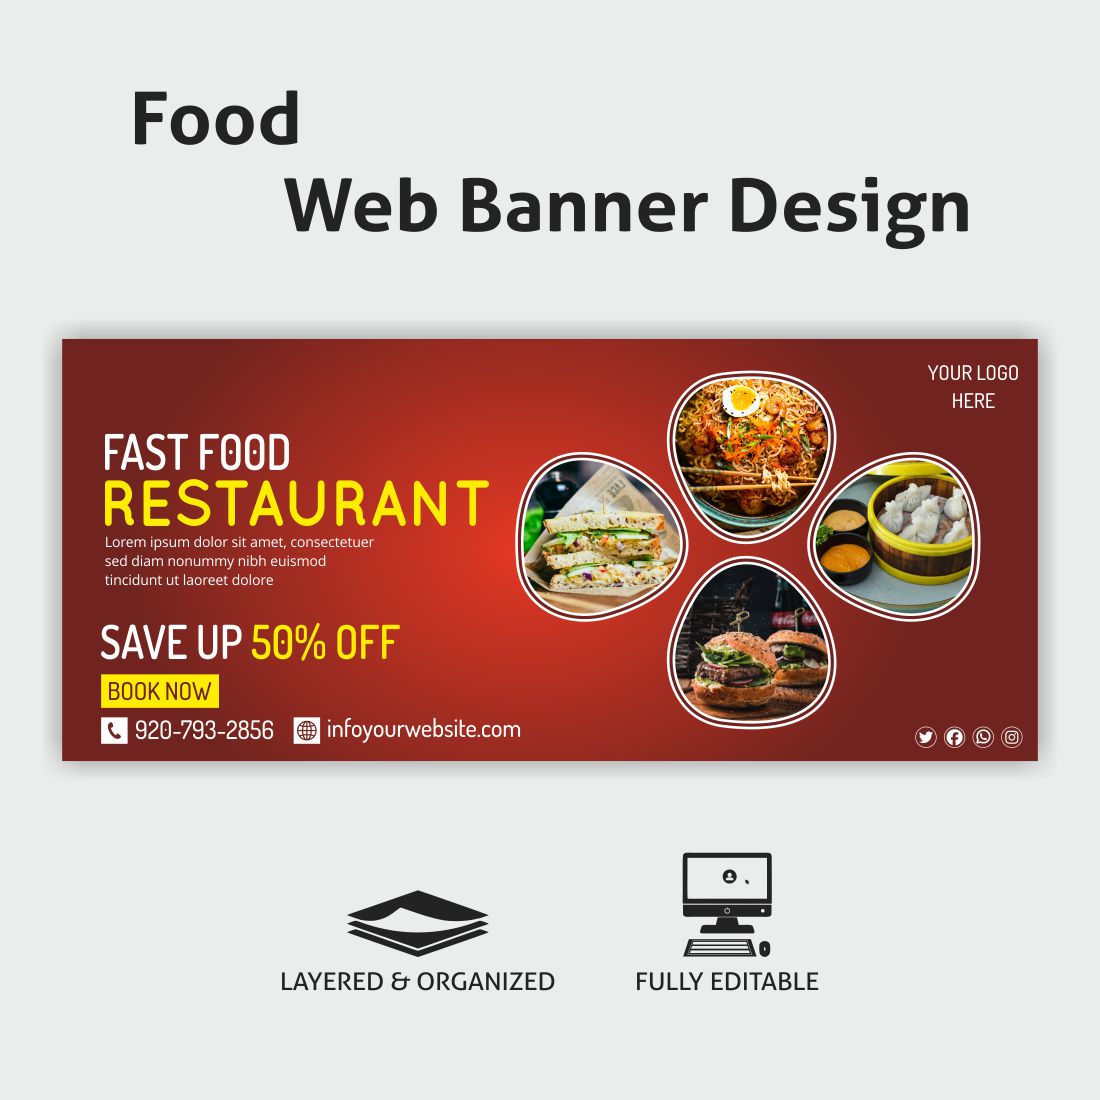 Food Web Banner Deisgn cover image.